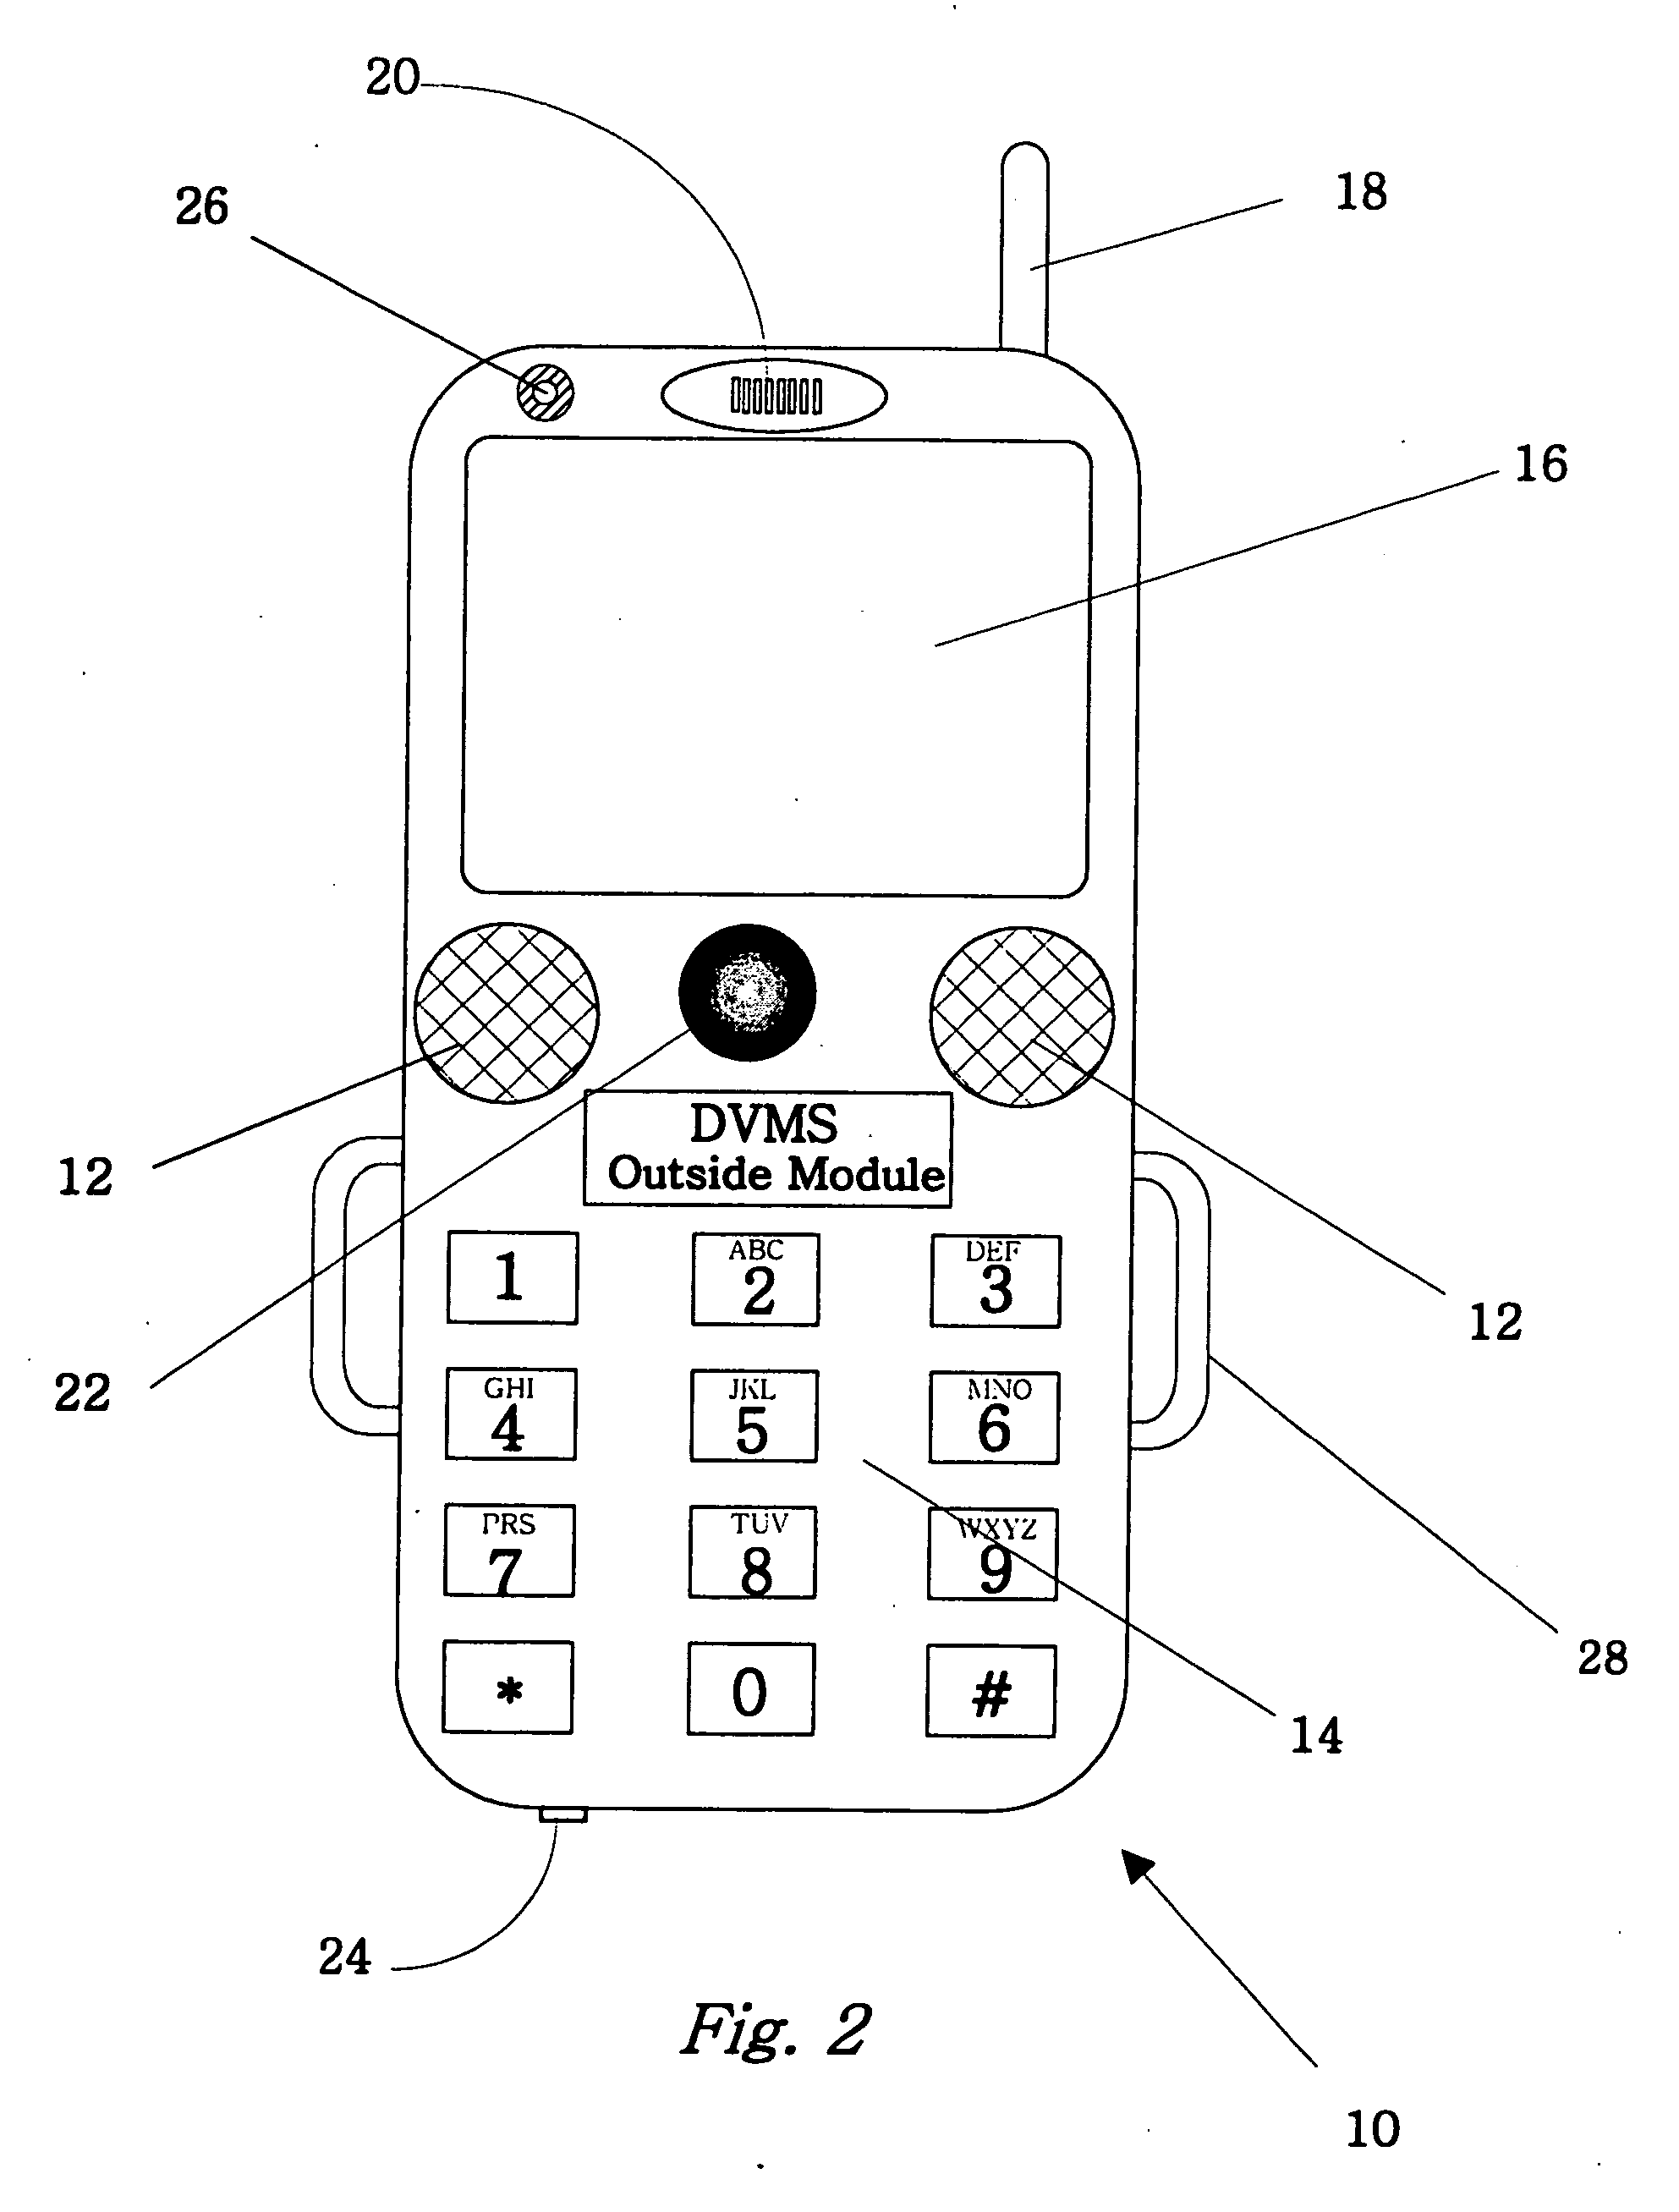 Automated audio video messaging and answering system